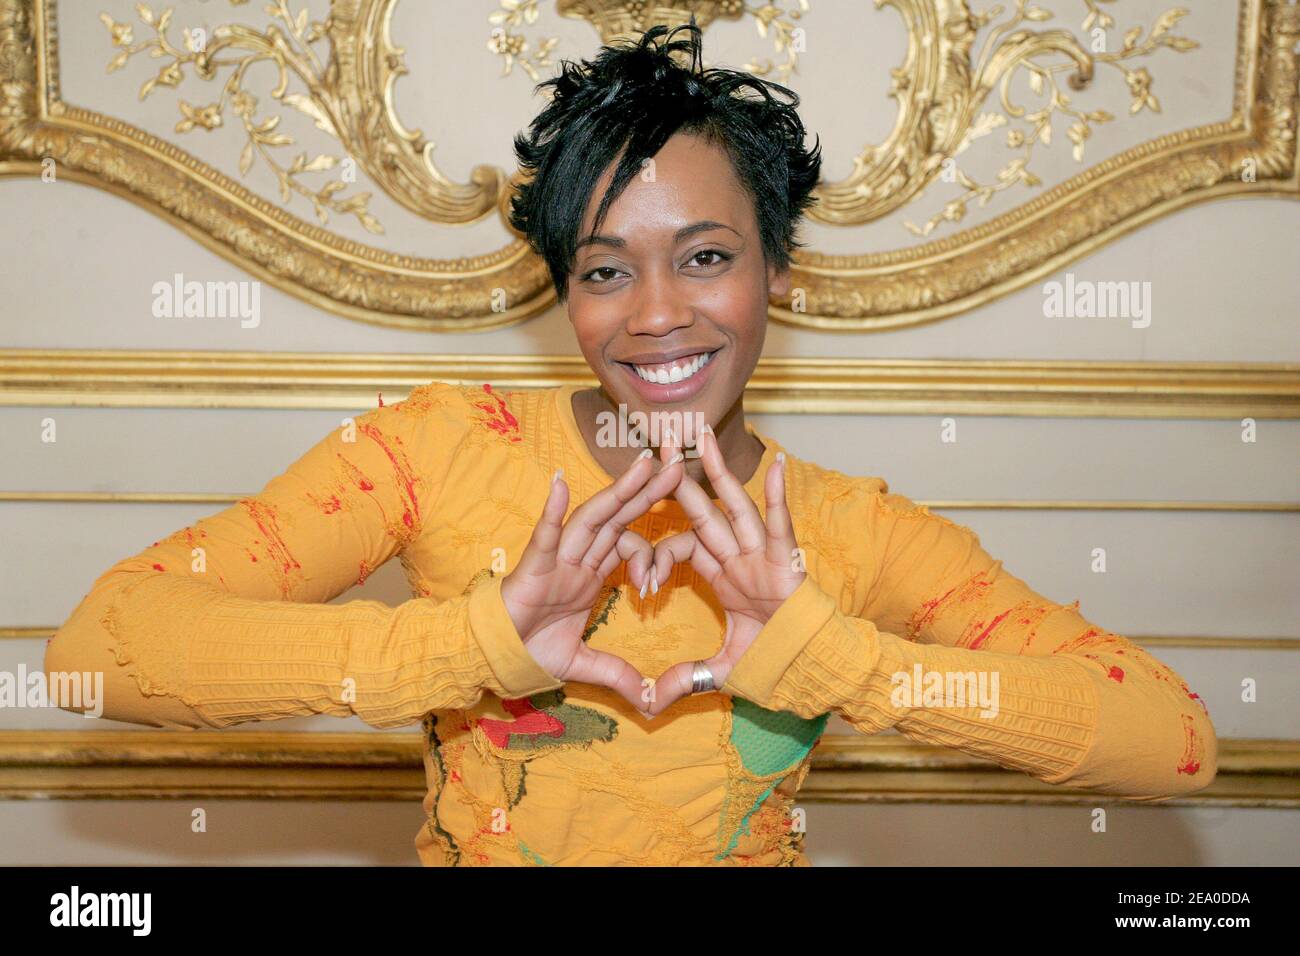 French singer Lynnsha poses at press conference for the 17th 'Open du Coeur' operation at the Senate in Paris, France on March 31, 2005. Photo by Laurent Zabulon/ABACA. Stock Photo